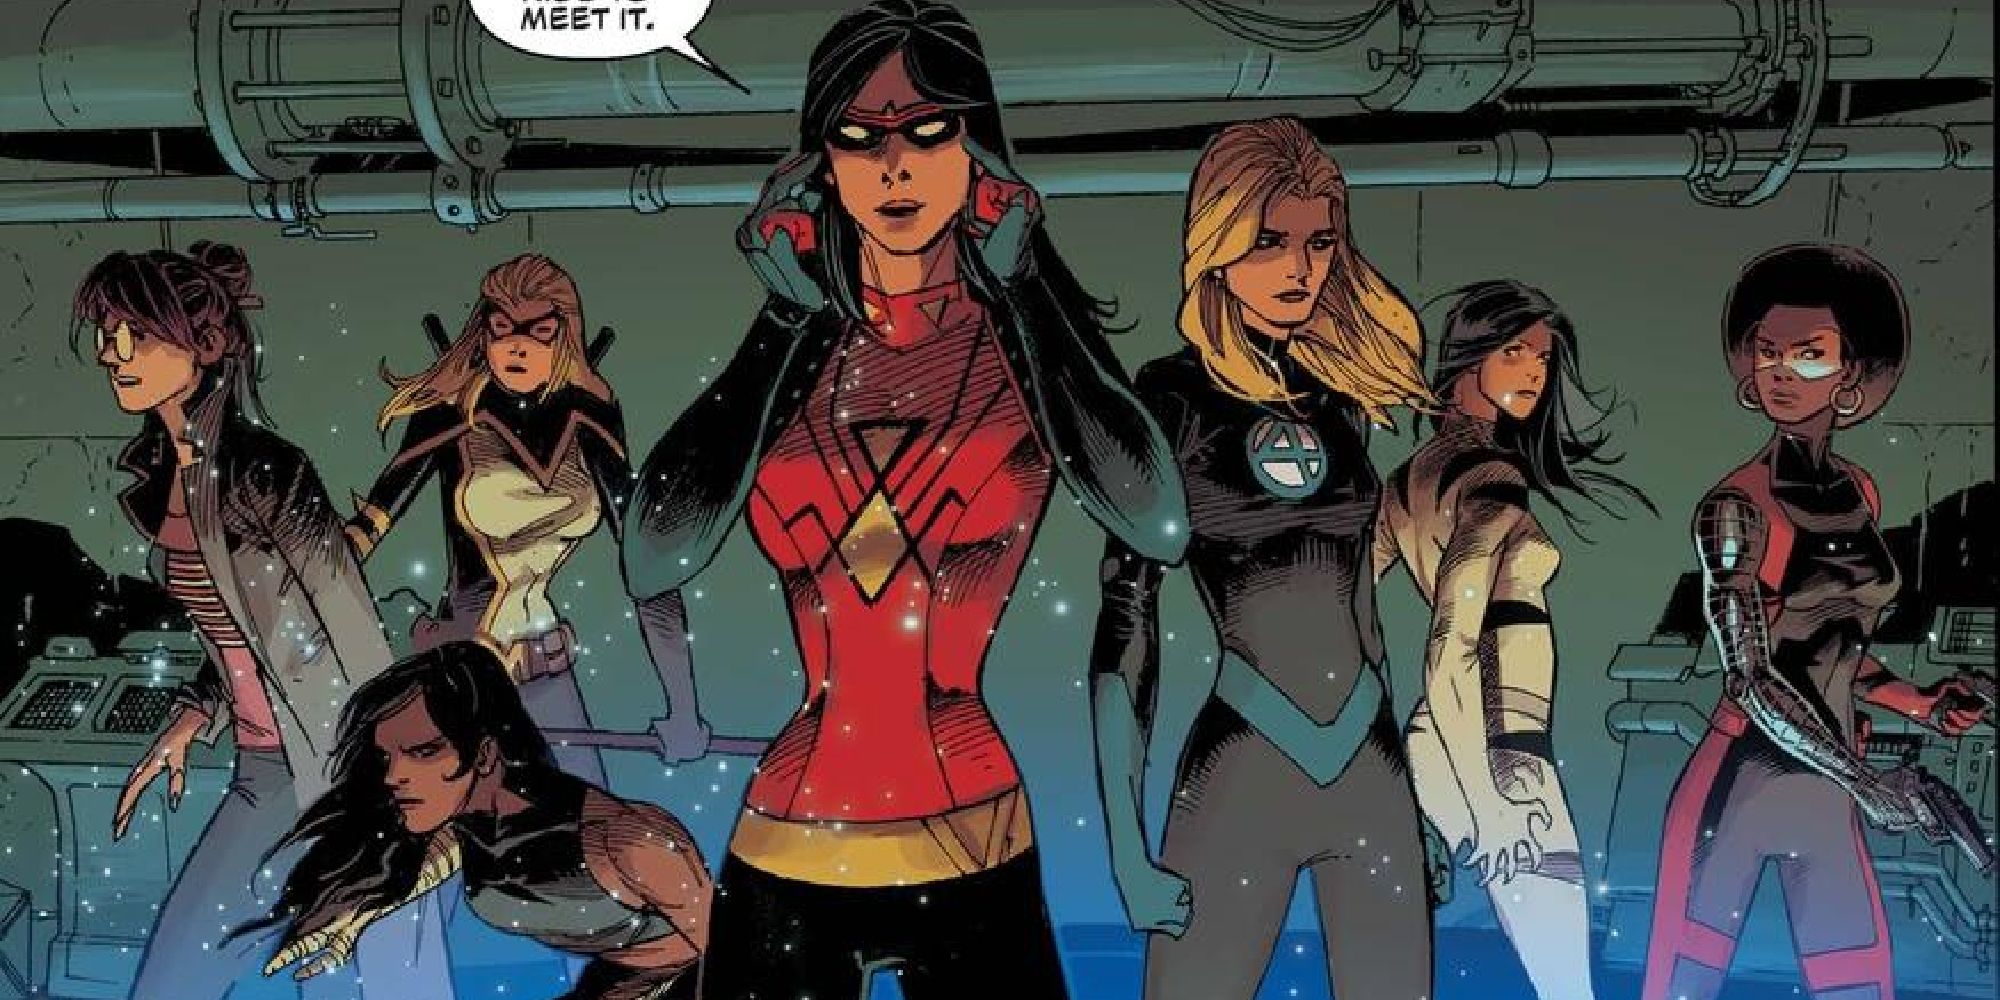 The Daughters of Liberty in the comics, including Jessica Drew, Sue Storm, and Maya Lopez